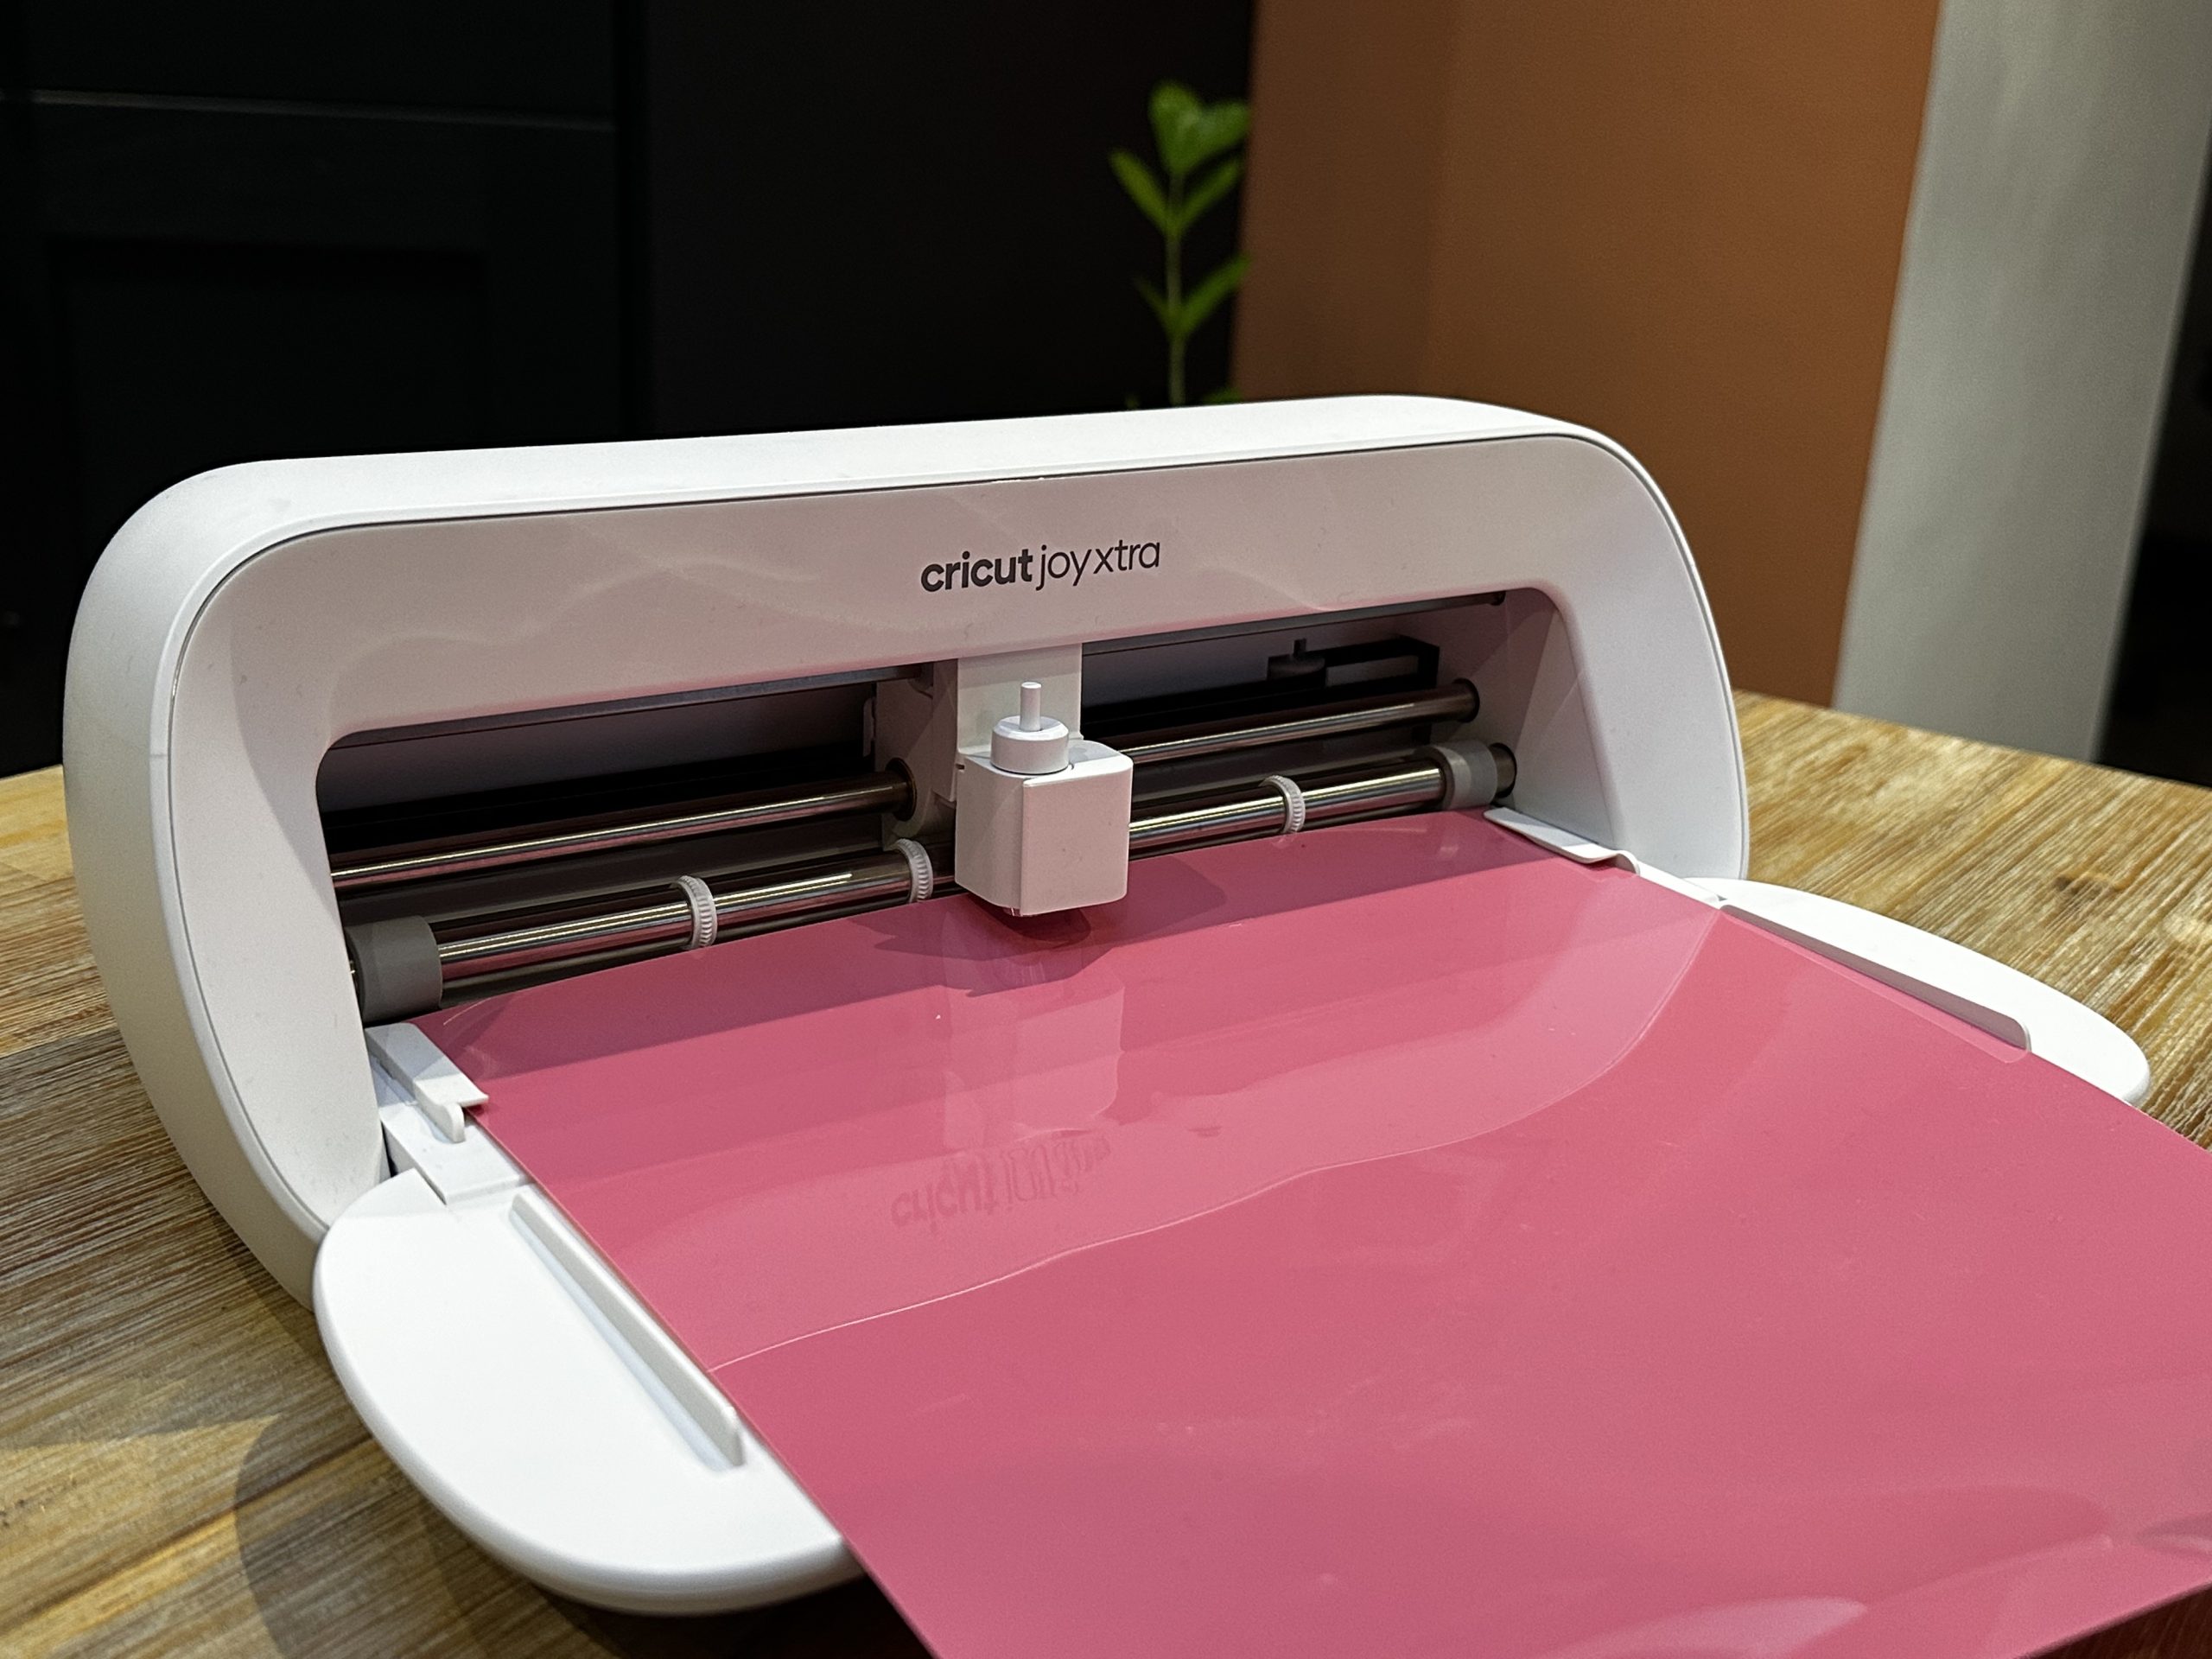 Cricut Joy Xtra budget mother's day projects